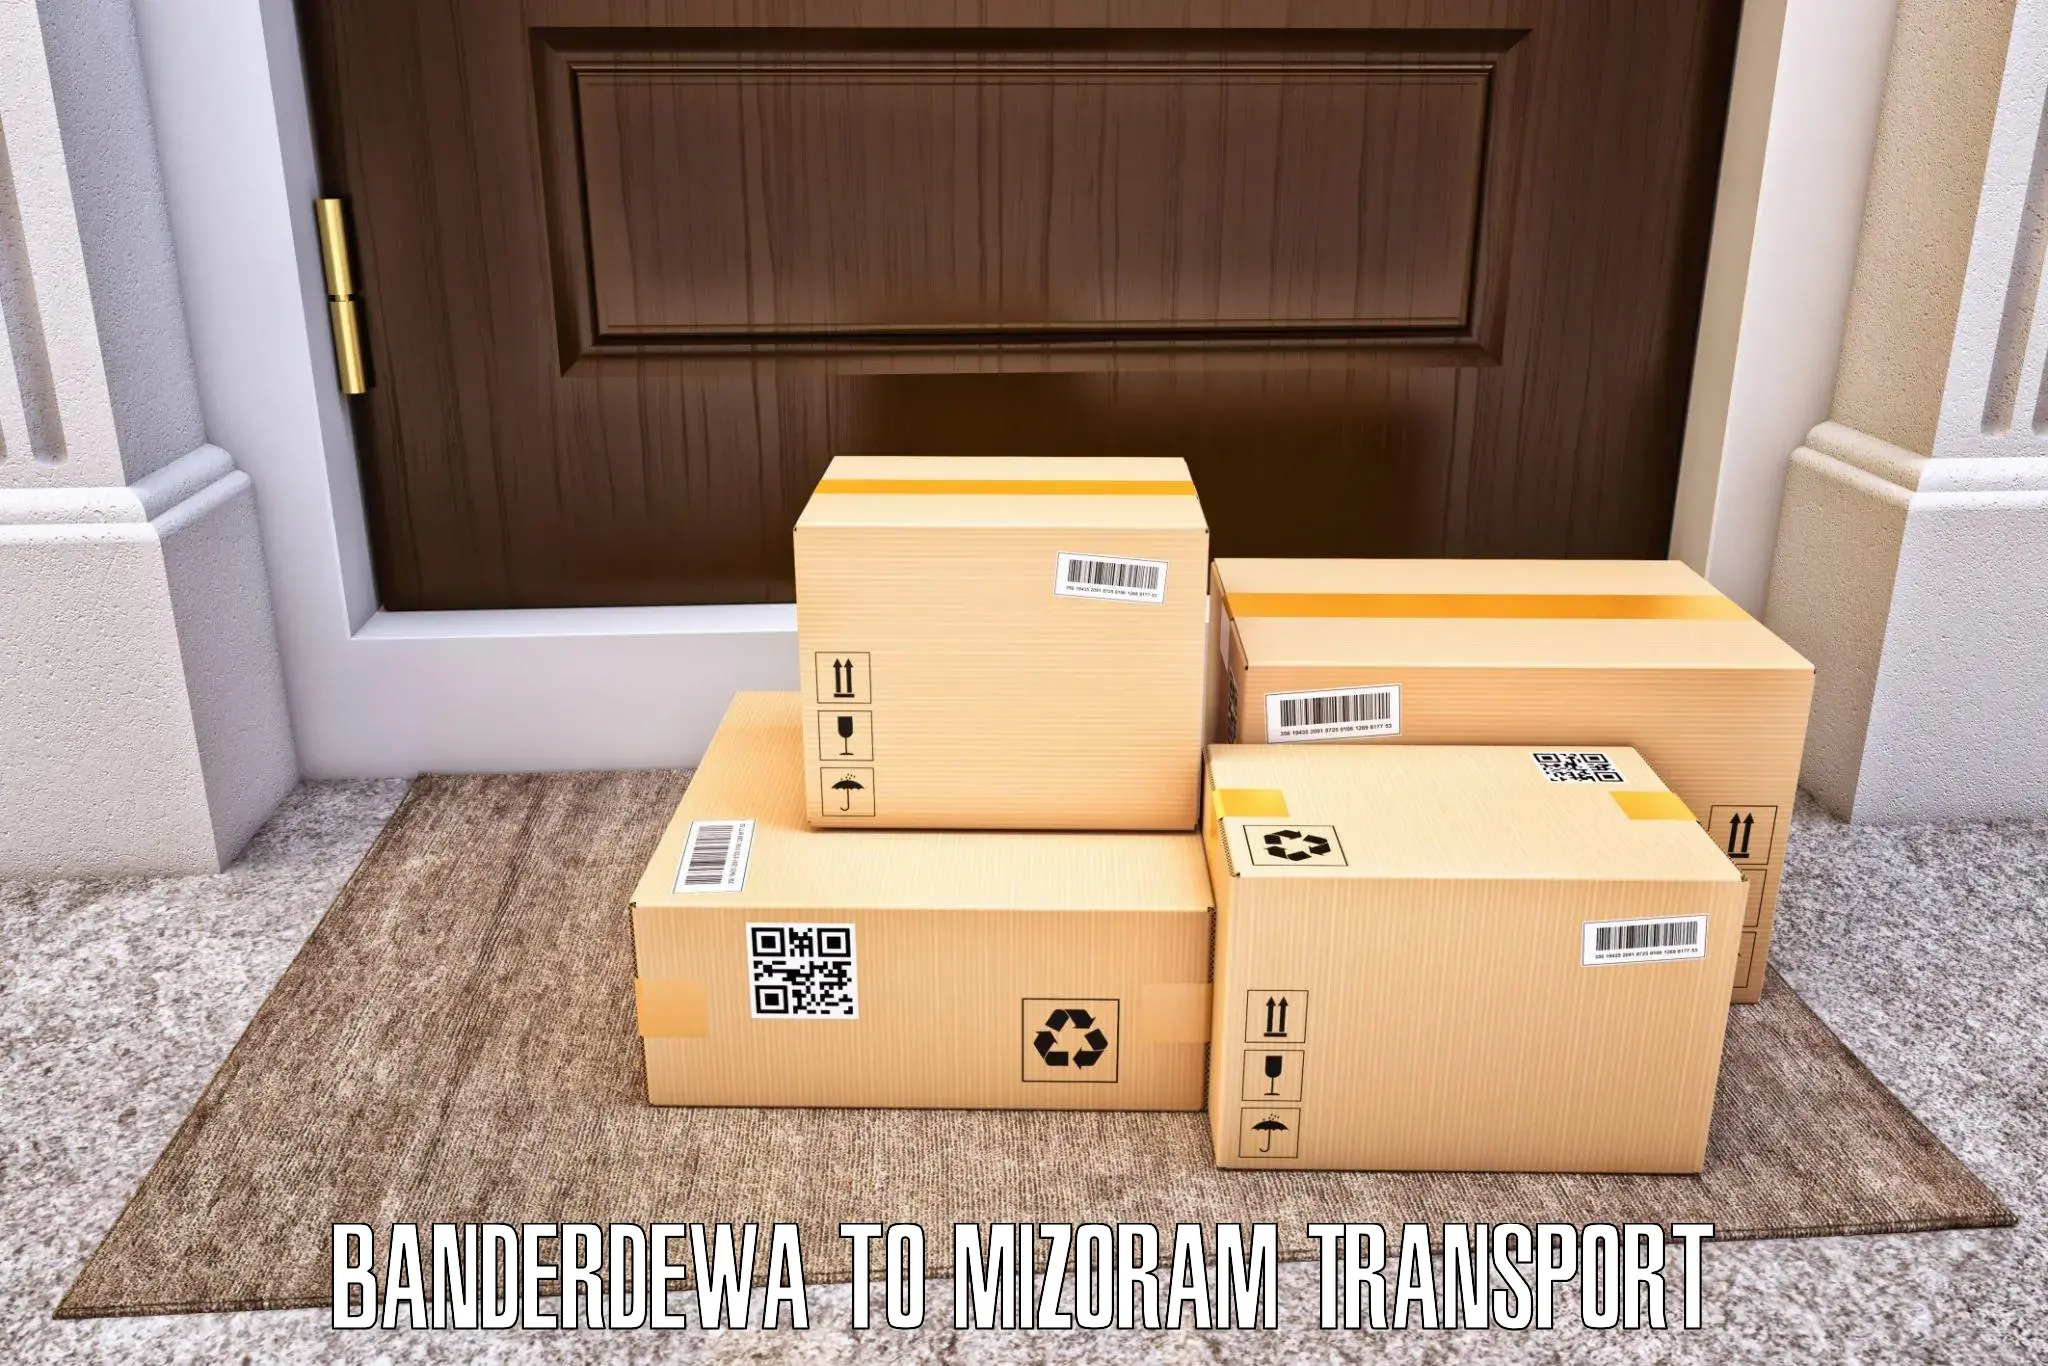 Air cargo transport services in Banderdewa to Siaha